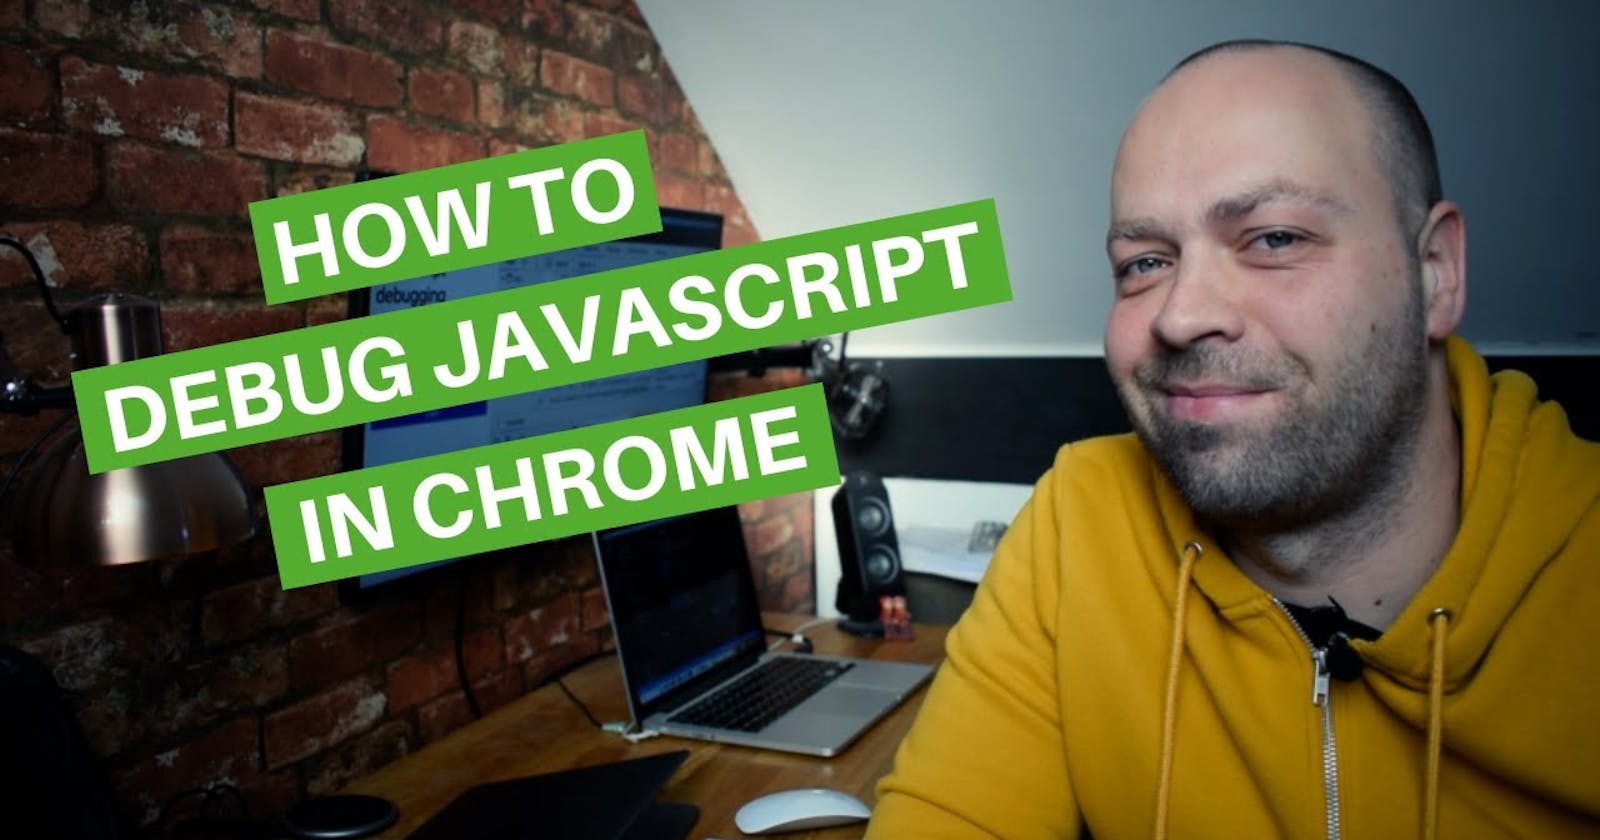 How to debug JavaScript code in Chrome